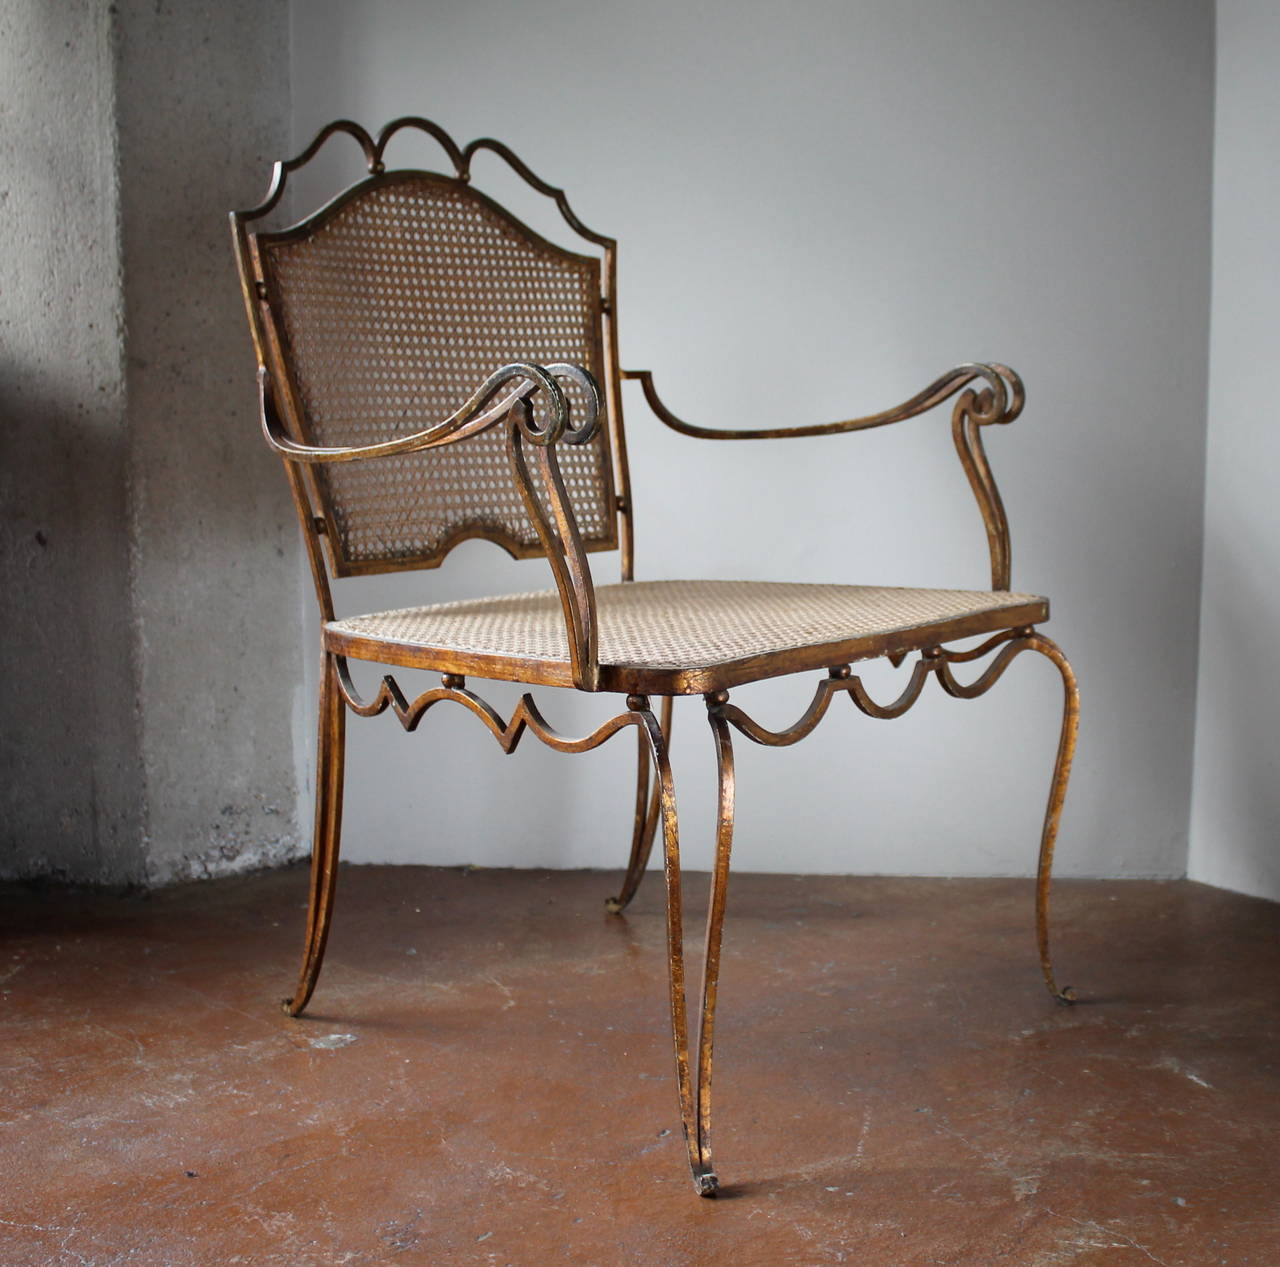 Stunning and rare set of four Arturo Pani gilt over iron hand caned chairs,
Mexico City, circa 1940s
In the style of Rene Prou
seat height: 15.5